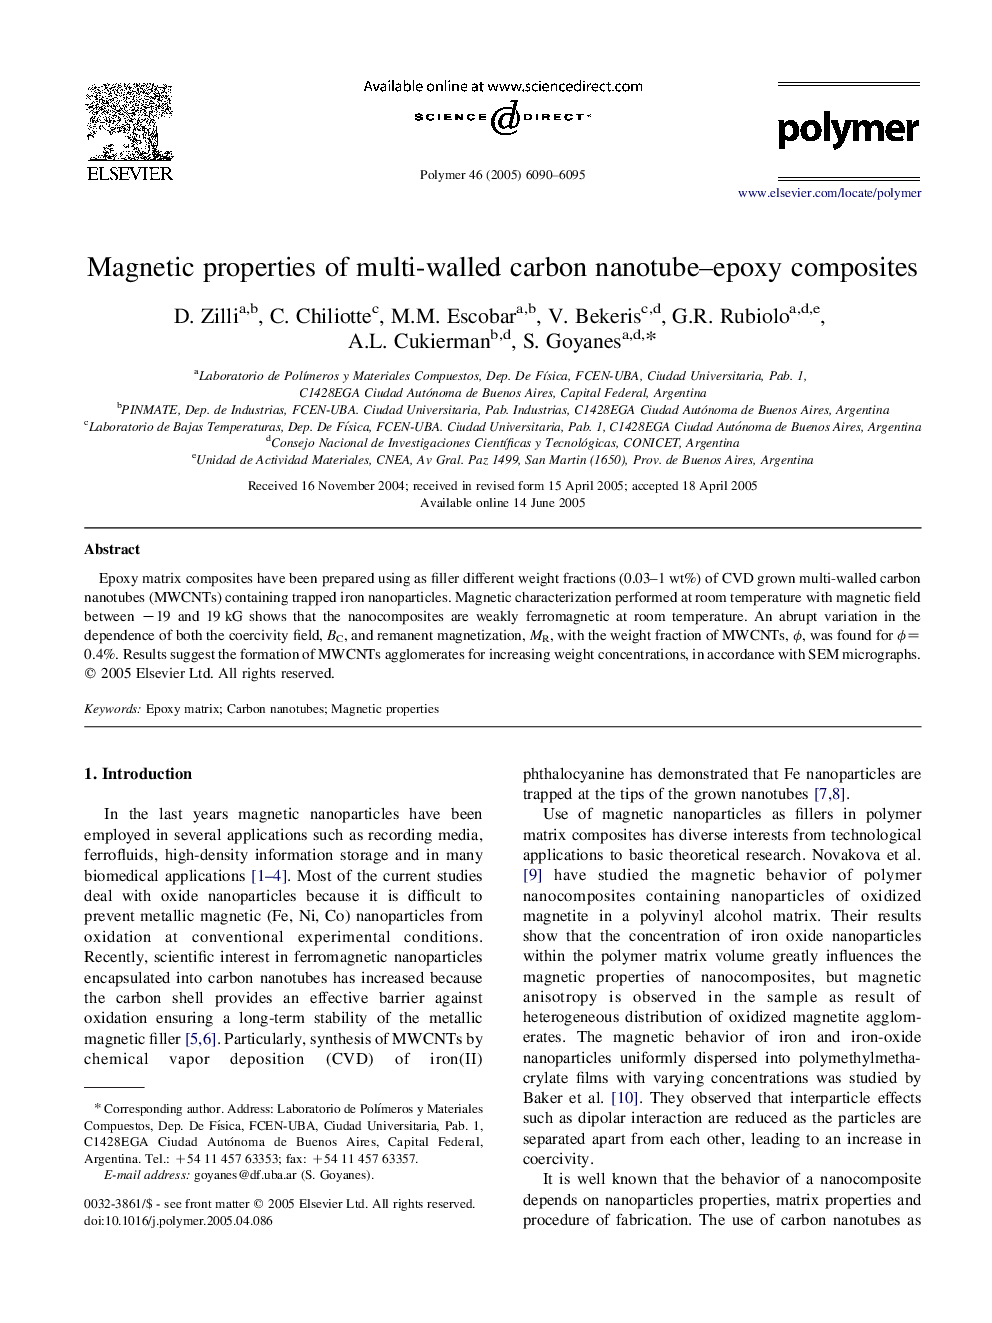 Magnetic properties of multi-walled carbon nanotube-epoxy composites